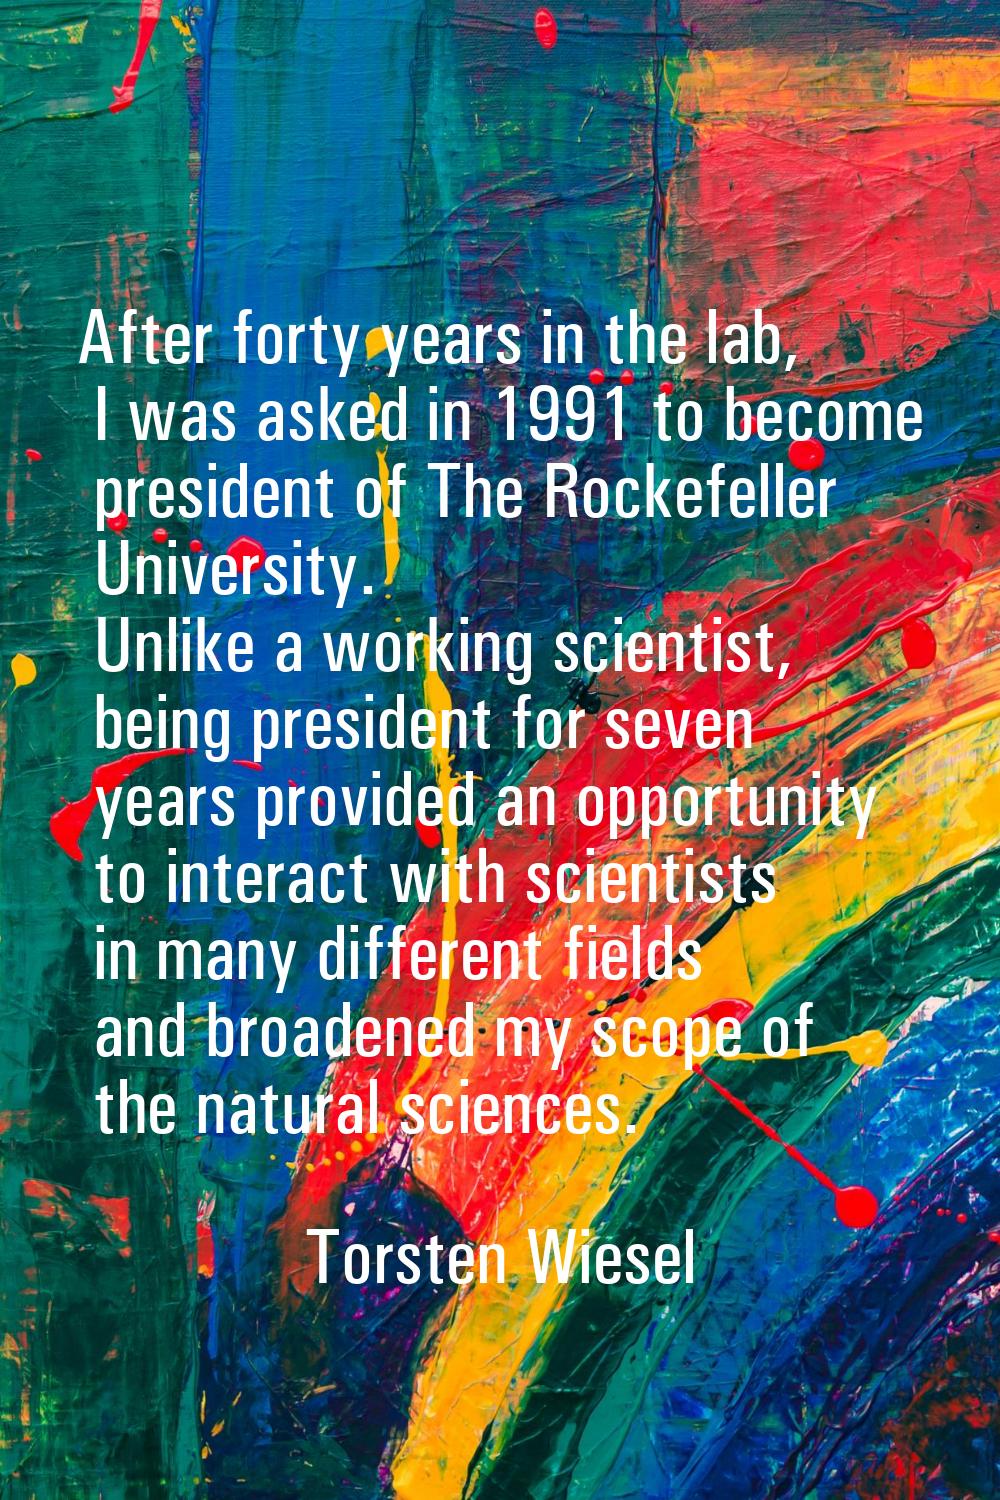 After forty years in the lab, I was asked in 1991 to become president of The Rockefeller University